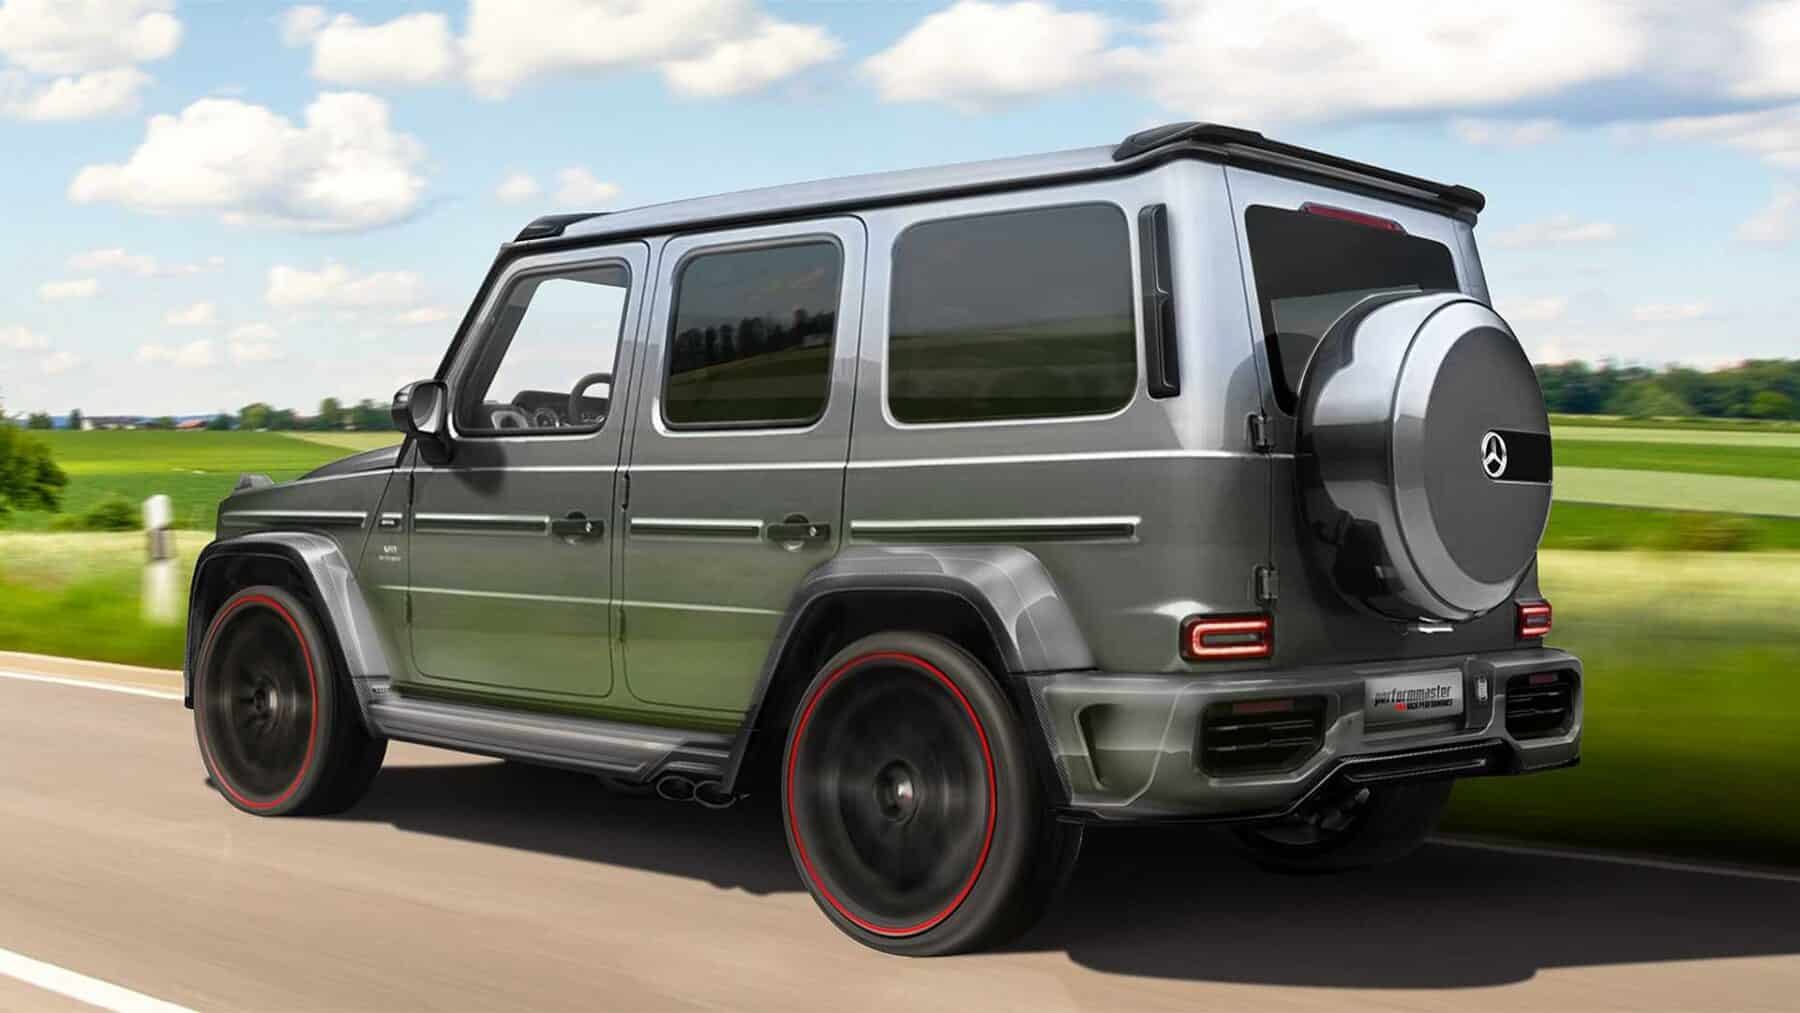 Diet rich in carbon fiber and more than 800 hp for the Mercedes-AMG G63